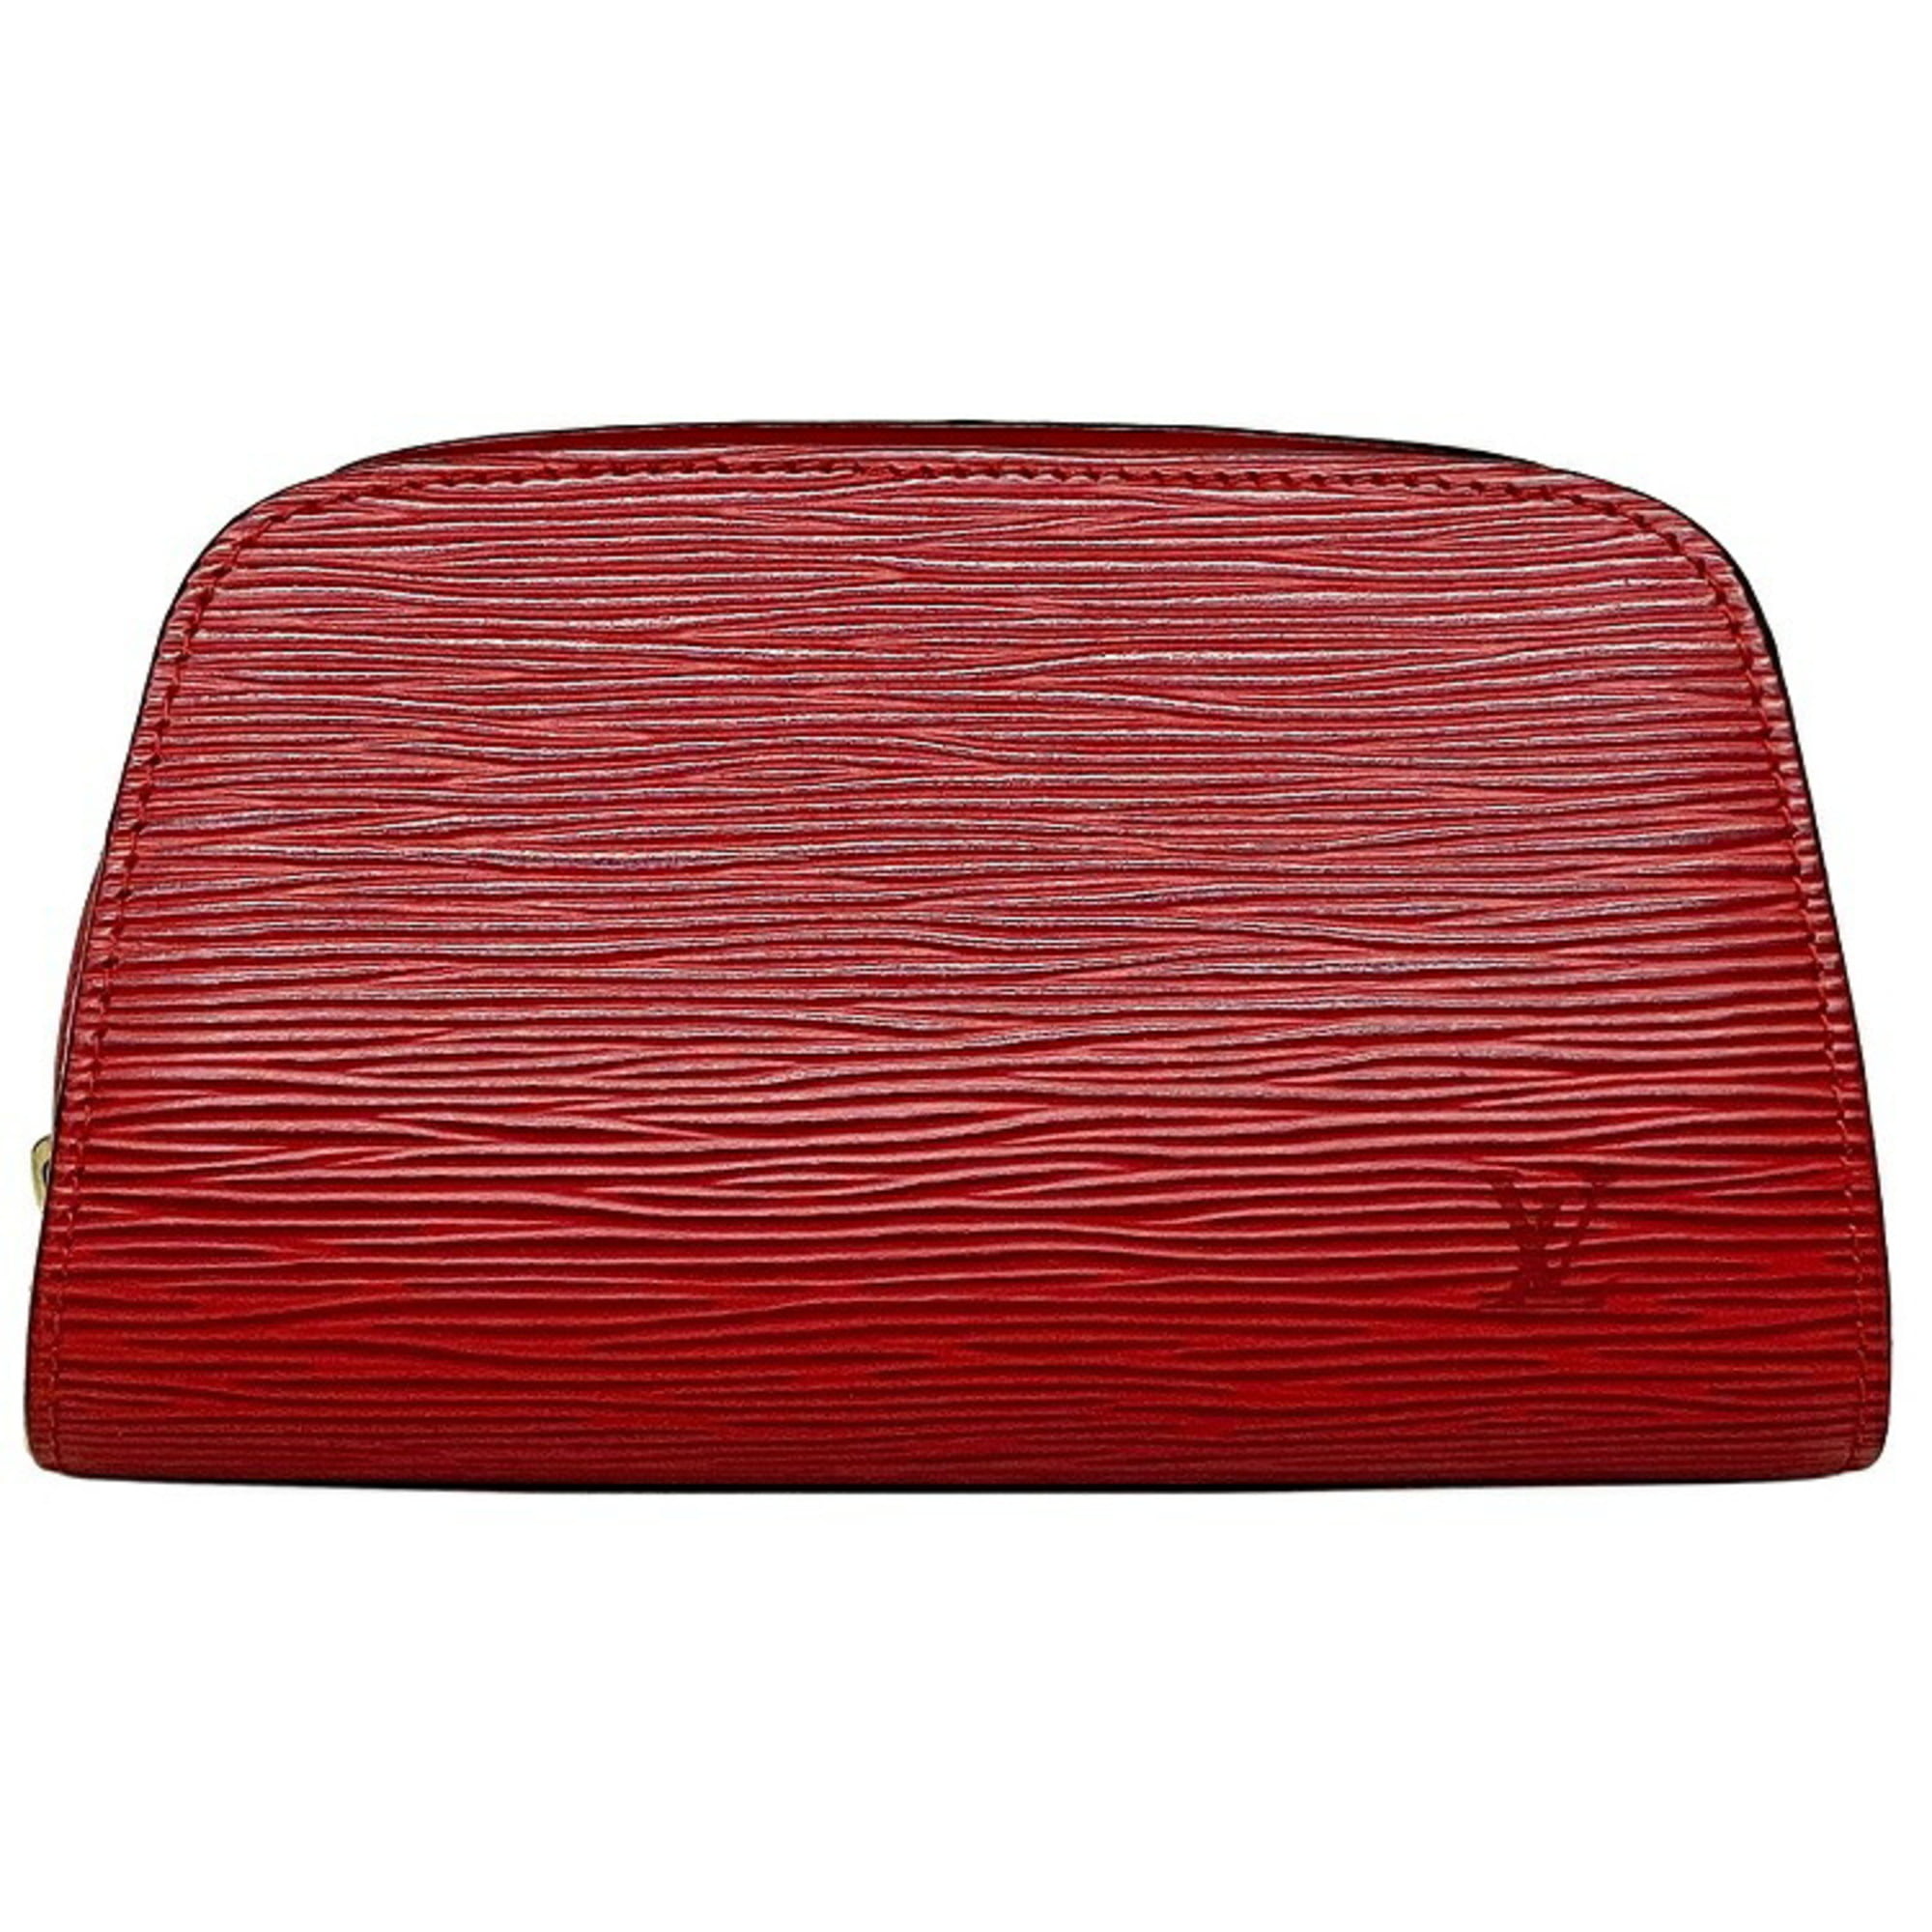 Louis Vuitton, Bags, Louis Vuitton Red Dauphine Epi Leather Pm Cosmetic